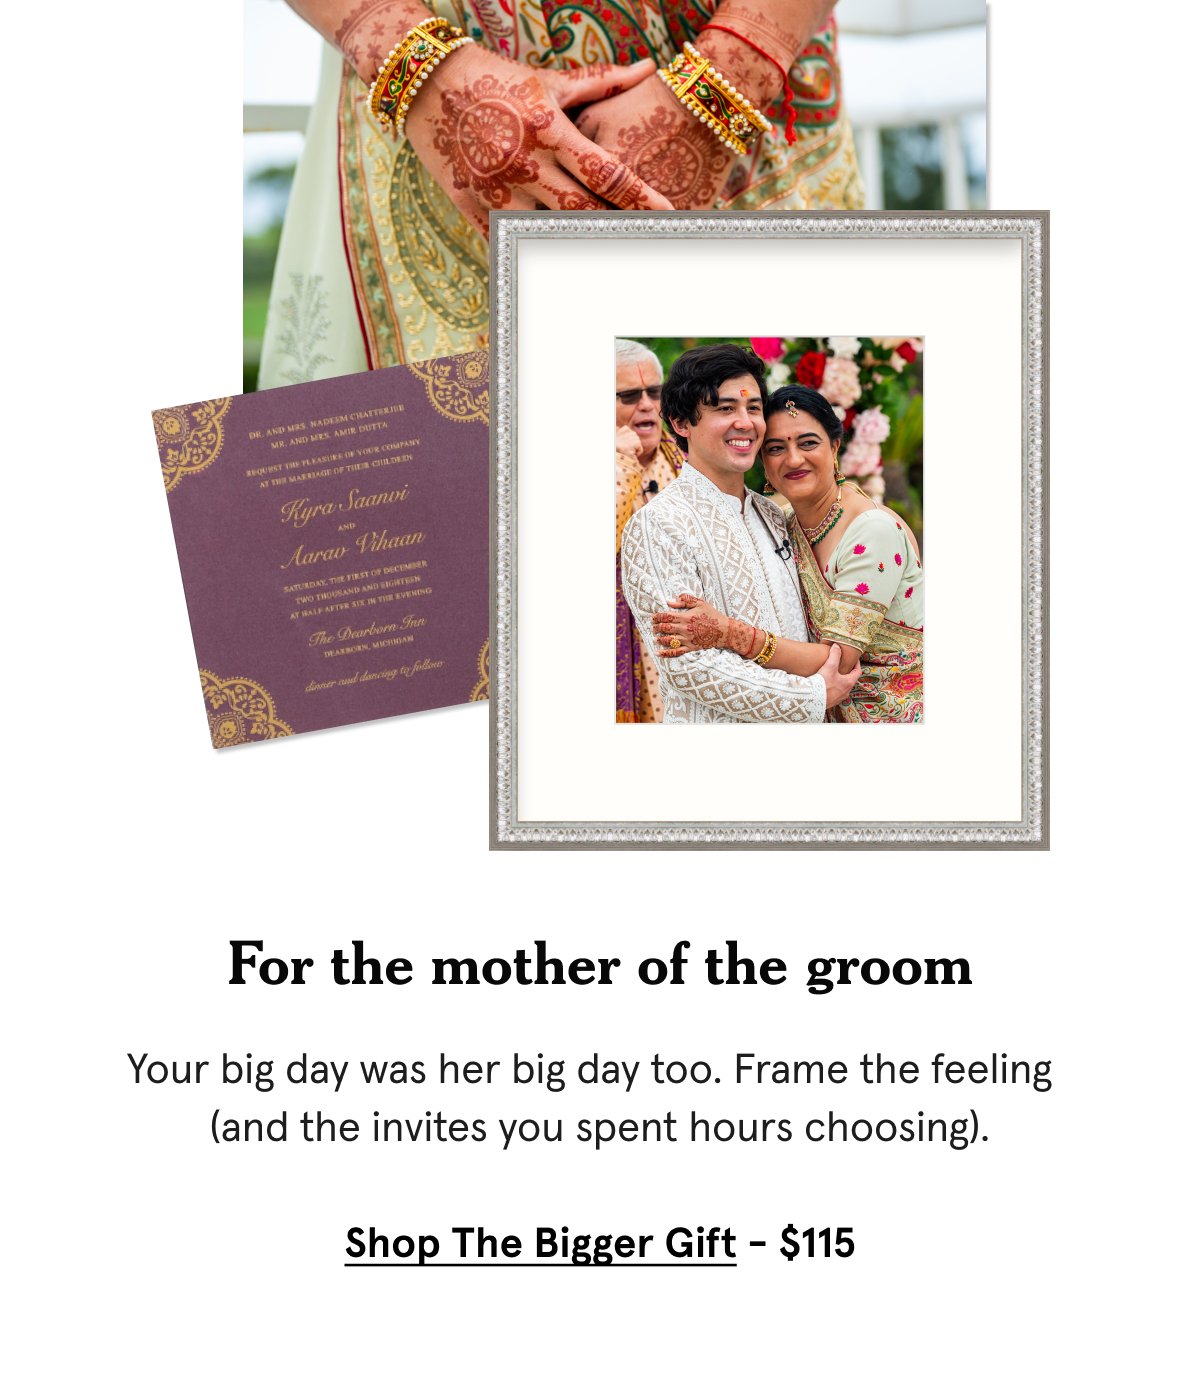 Your big day was her big day too. Frame the feeling (and the invites you spent hours choosing).